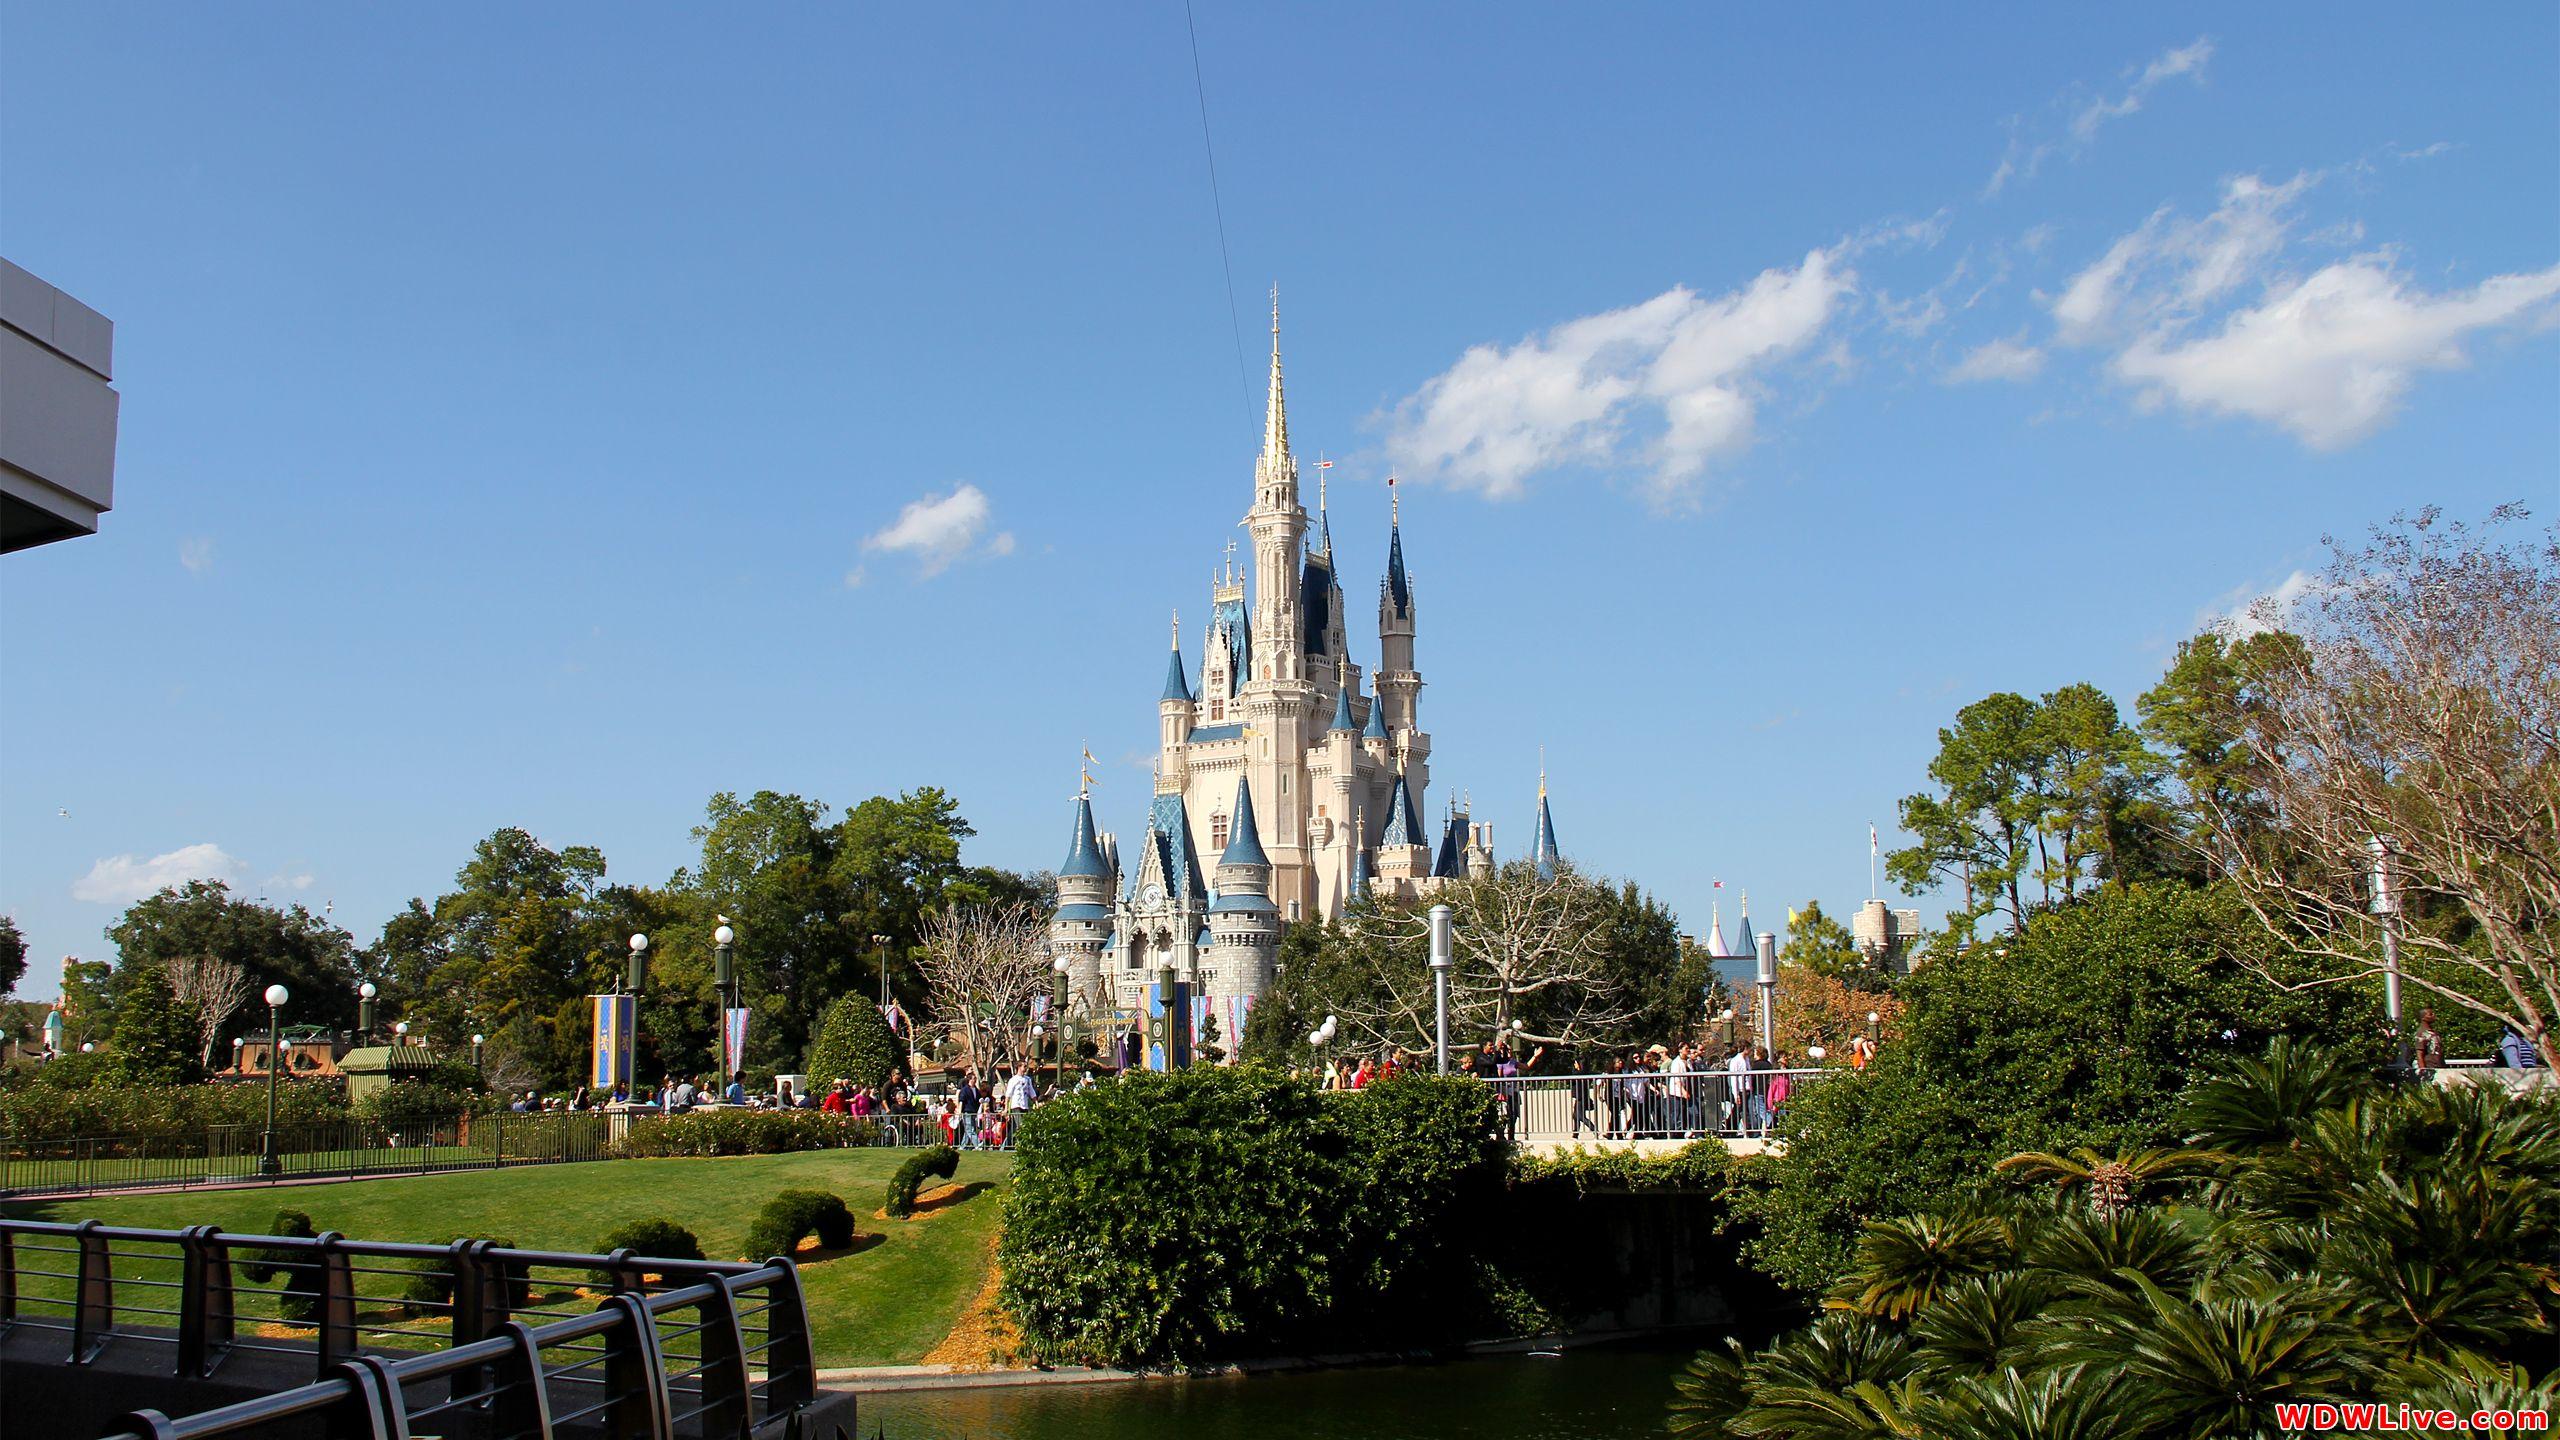 15 Stunning Disney World Wallpapers to Bring the Magic to Your Phone   AllEarsNet